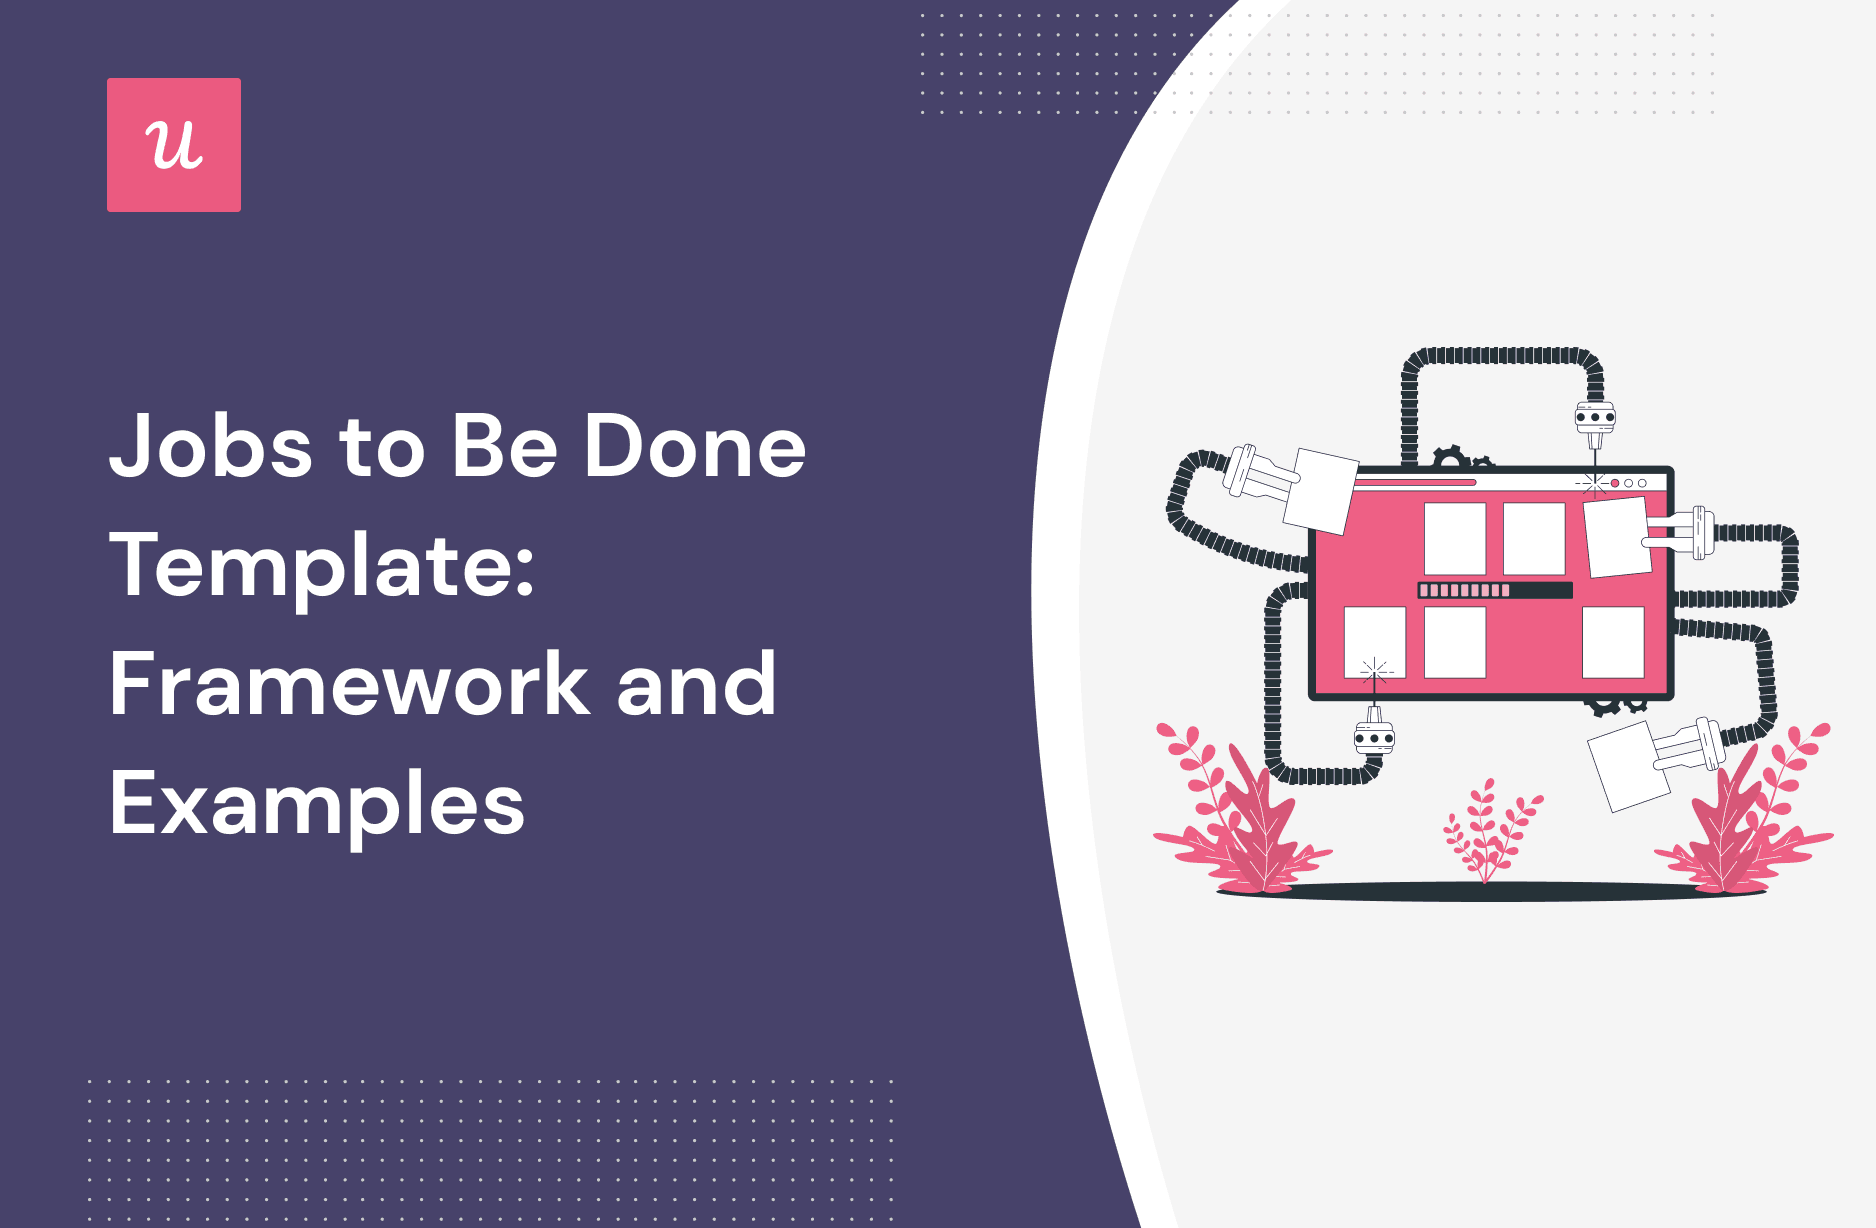 Jobs-to-Be-Done Template: Framework and Examples cover